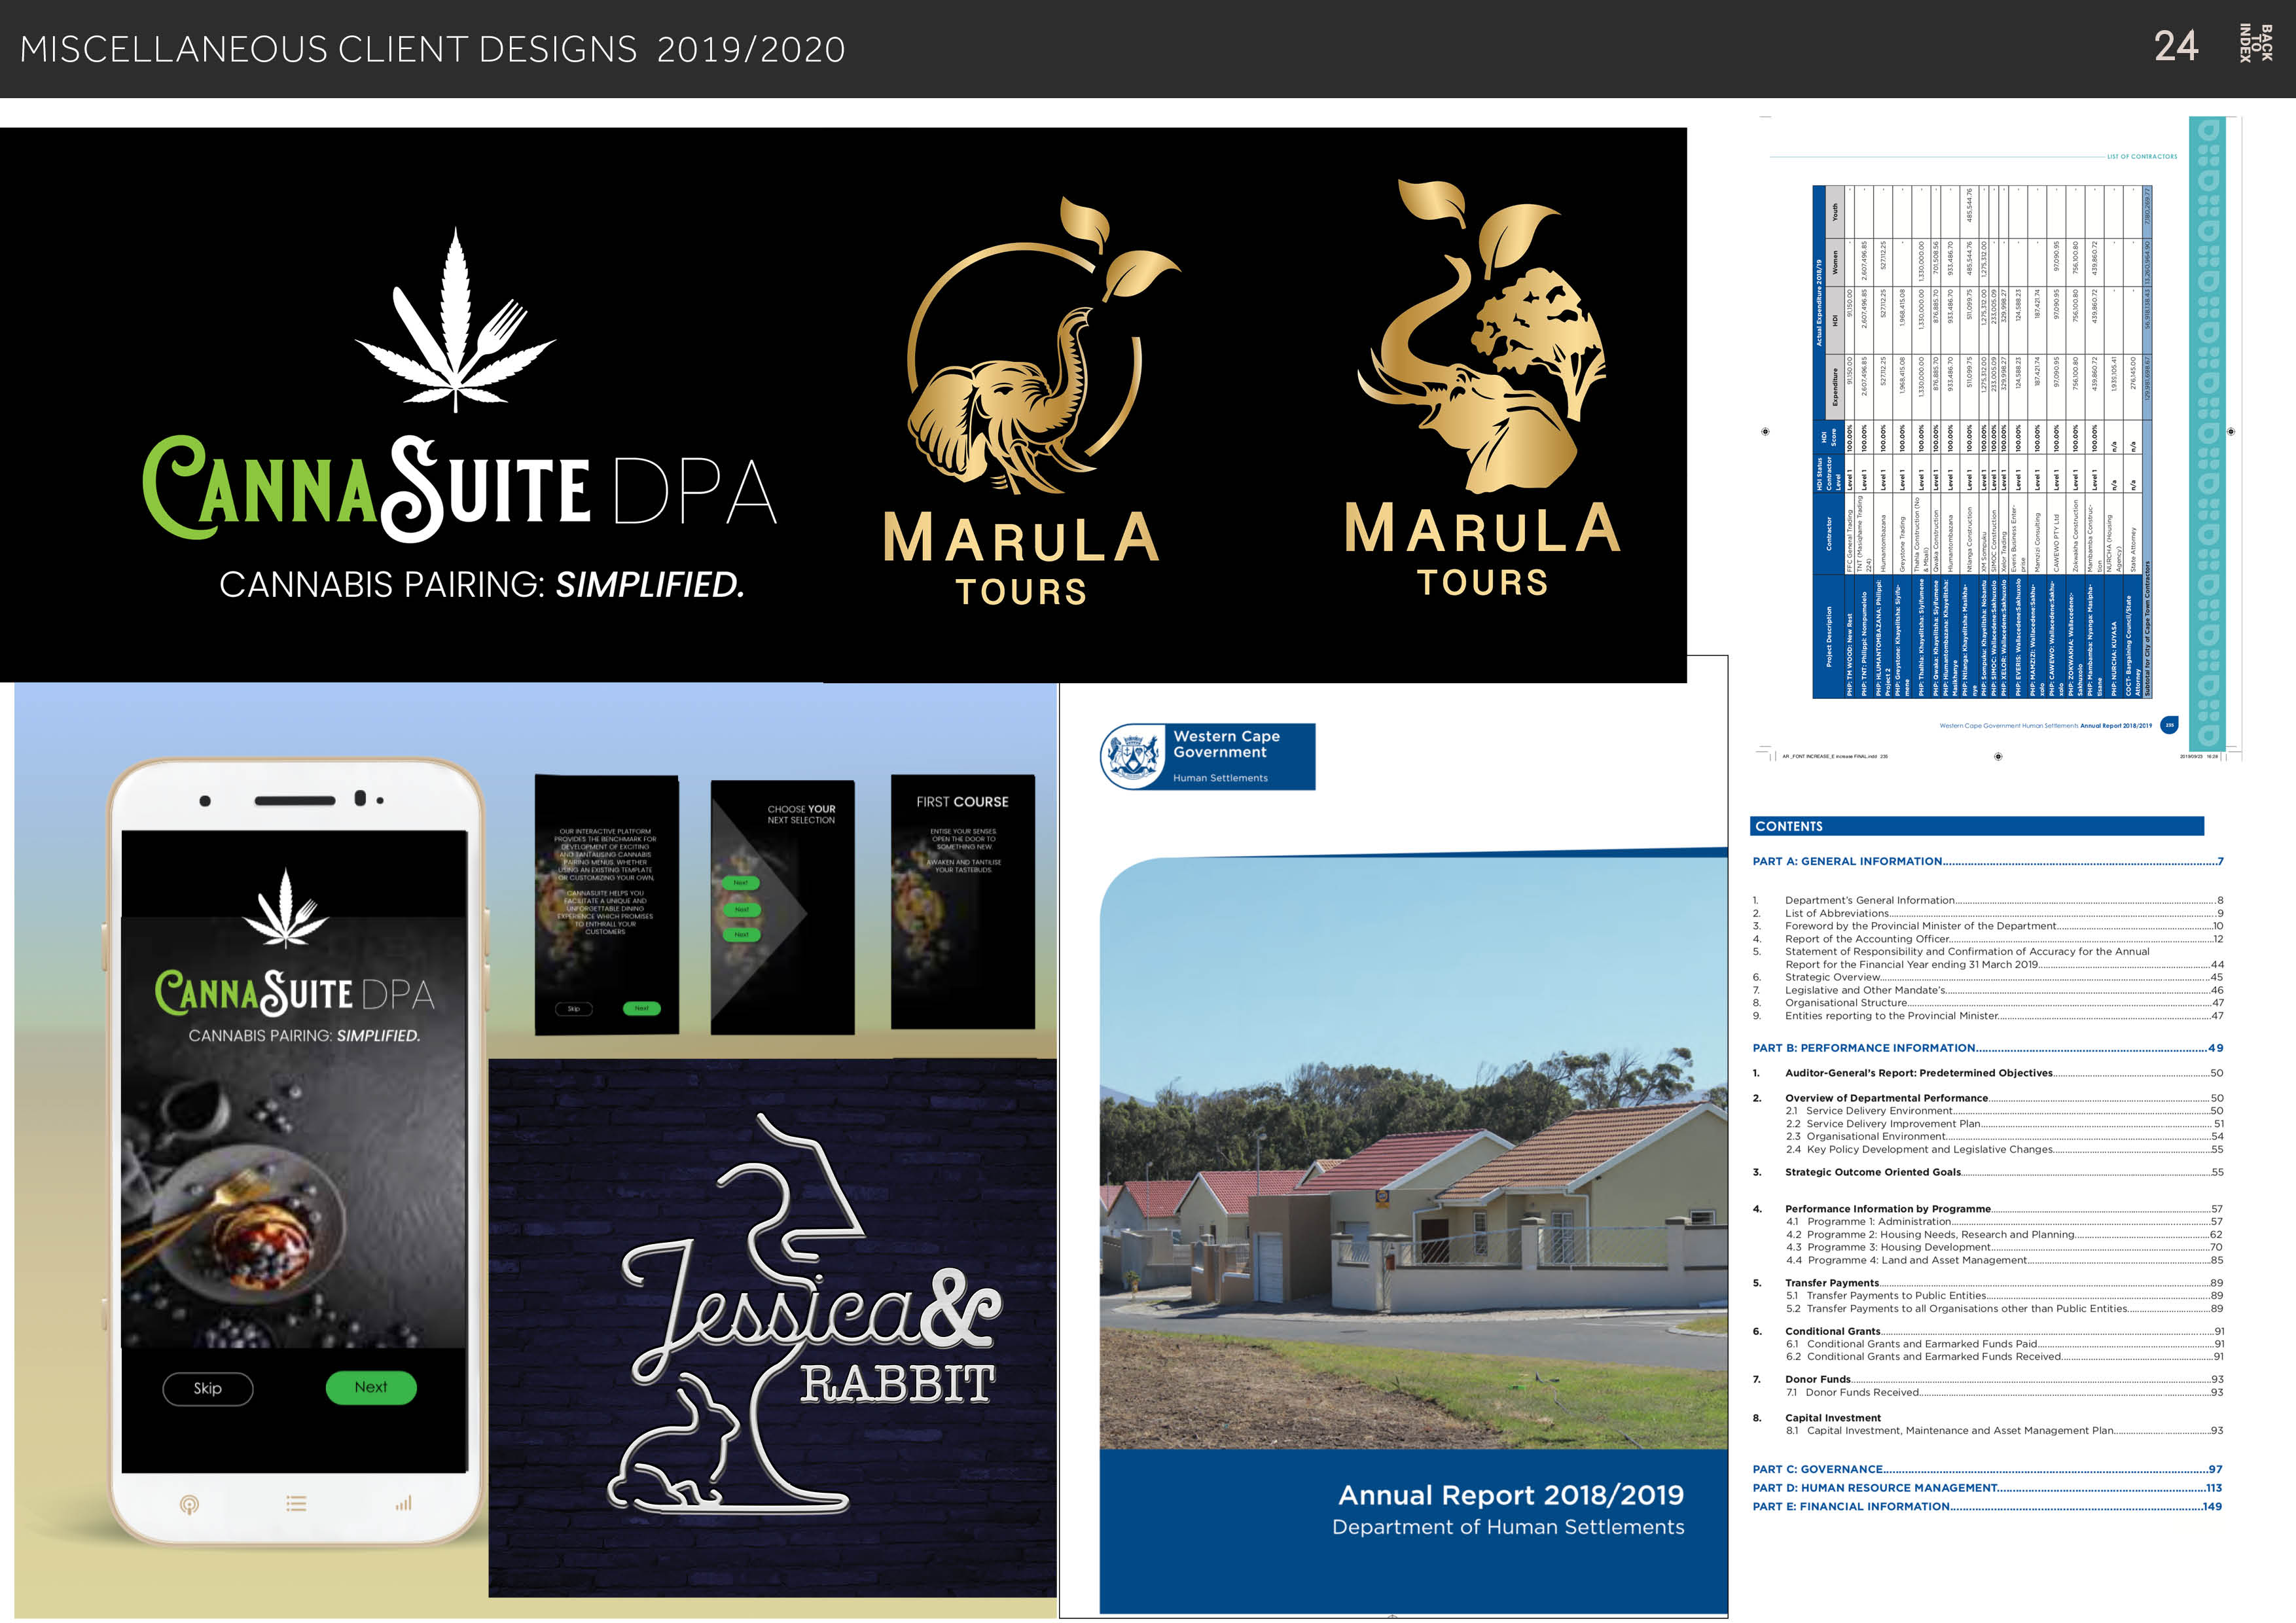 MISCELLANEOUS CLIENT DESIGNS 2019/2020 PY

\
ESA
CANNAQUITE DPA PVR rg)

CANNABIS PAIRING: SIMPLIFIED. TOURS TOURS

  

\

 
   

Western Cape
Government

        
 
     
   
 
    
     
 

   

RST COURSE
CONTENTS

PART A: GENERAL INFORMATION

CANNAQUITE DPA

CANNABIS PAIRING: SIMPLIFIED.

PART B: PERFORMANCE INFORMATION

1 Auditor-General's Report: Predetermined Objectives.

    

® 2. Overview of D ntal Performance

)

) 4 3 ; \ = ~ Strategic Outcome Oriented Goals.
» yu = ) | WE S # fs =&gt; _
4 , 4 A 5 Performance Information by Programme
we

&gt; |
LJ
=i

  

Capital Investment

PART C: GOVERNANCE

Annual Report 201 8/2019 PART D: HUMAN RESOURCE MANAGEMENT.

PART E: FINANCIAL INFORMATION.
Department of Human Settlements